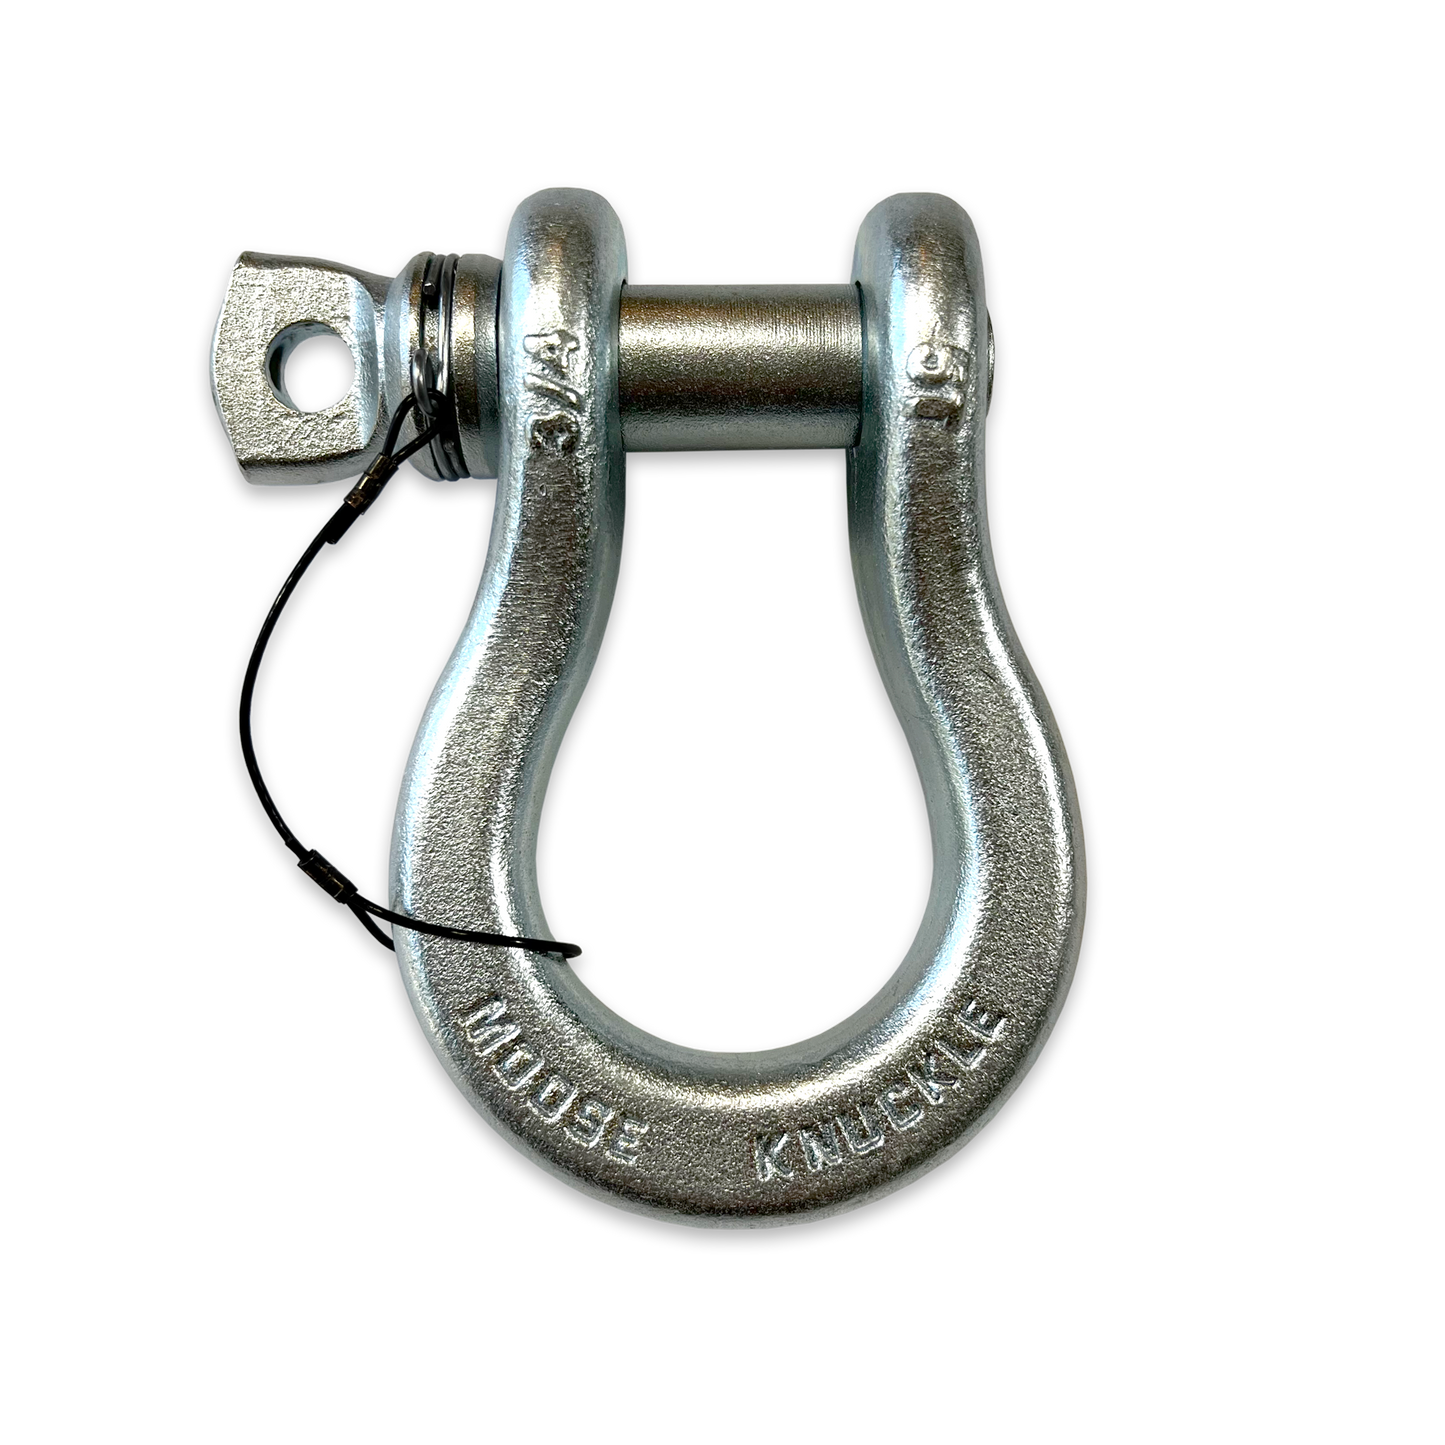 B'oh Spin Pin Shackle 3/4 (Chrome)